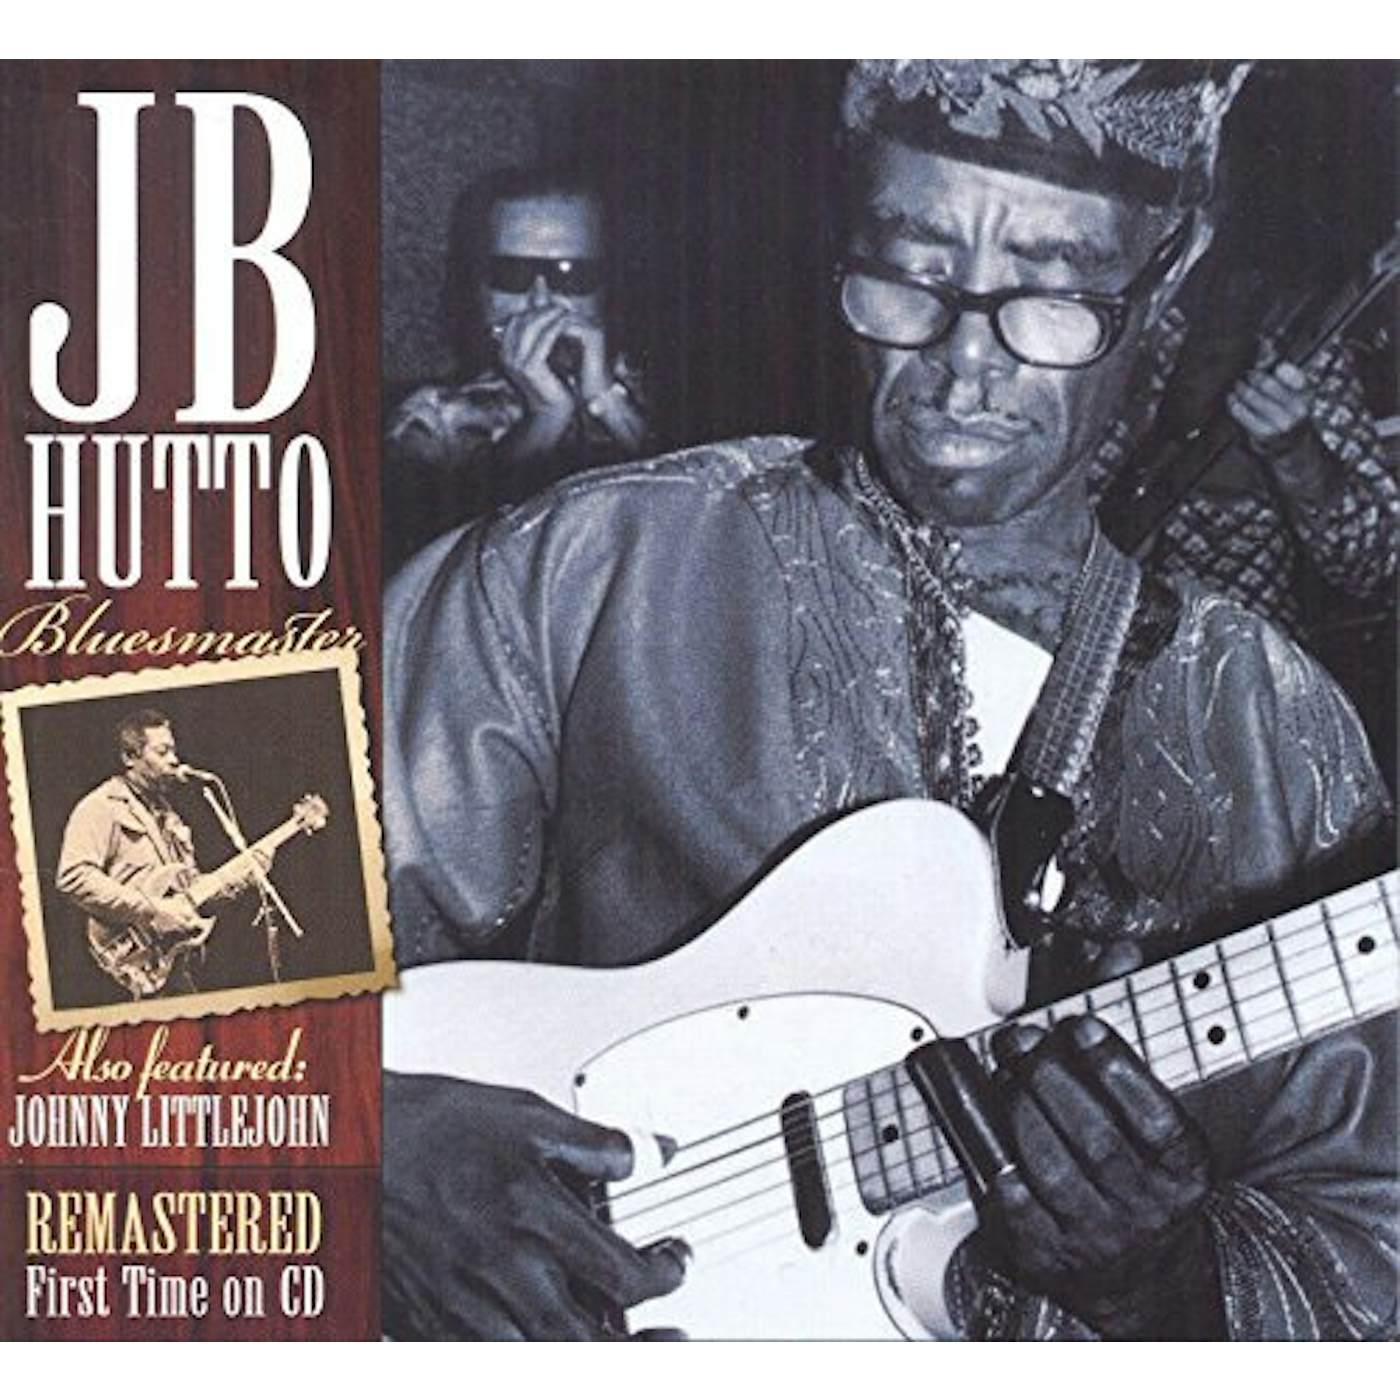 J. B. Hutto BLUESMASTER - THE LOST TAPES CD